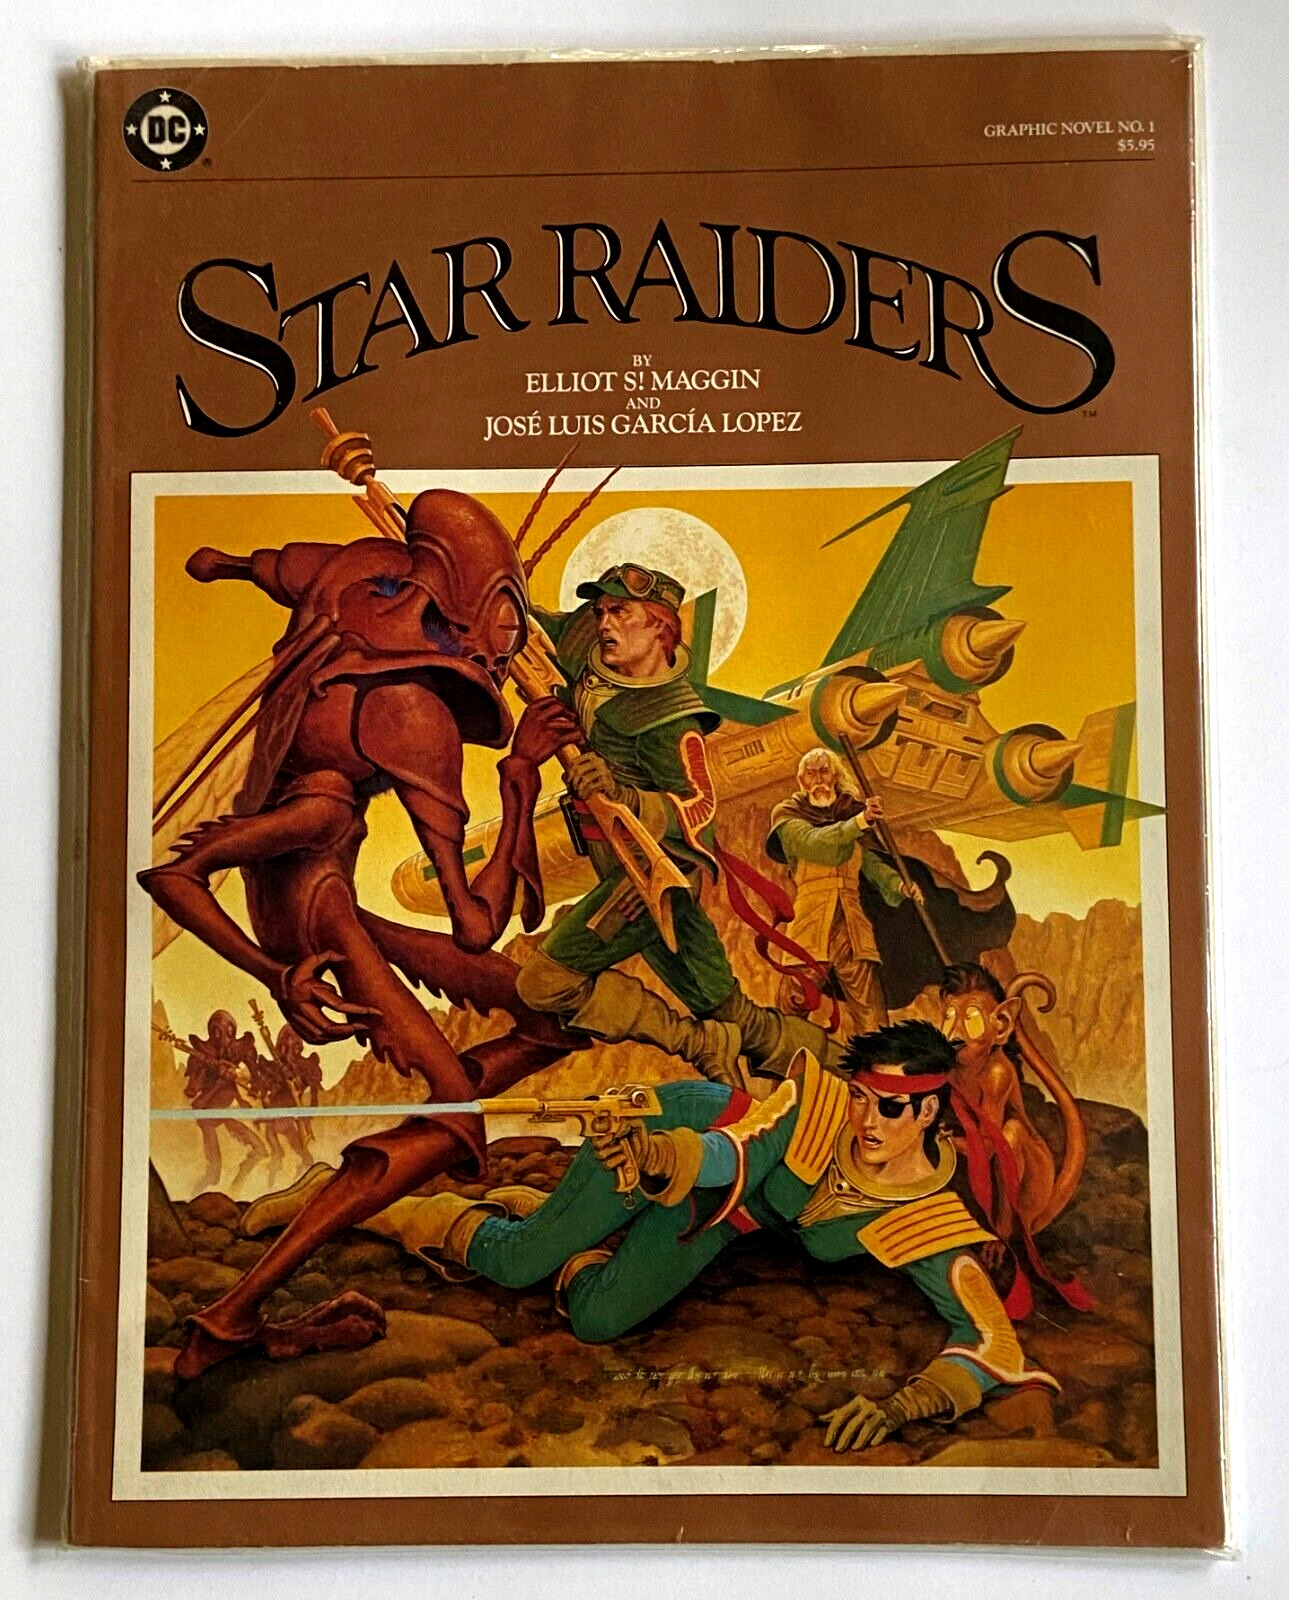 STAR RAIDERS DC GRAPHIC NOVEL #1  1983  64 PAGES